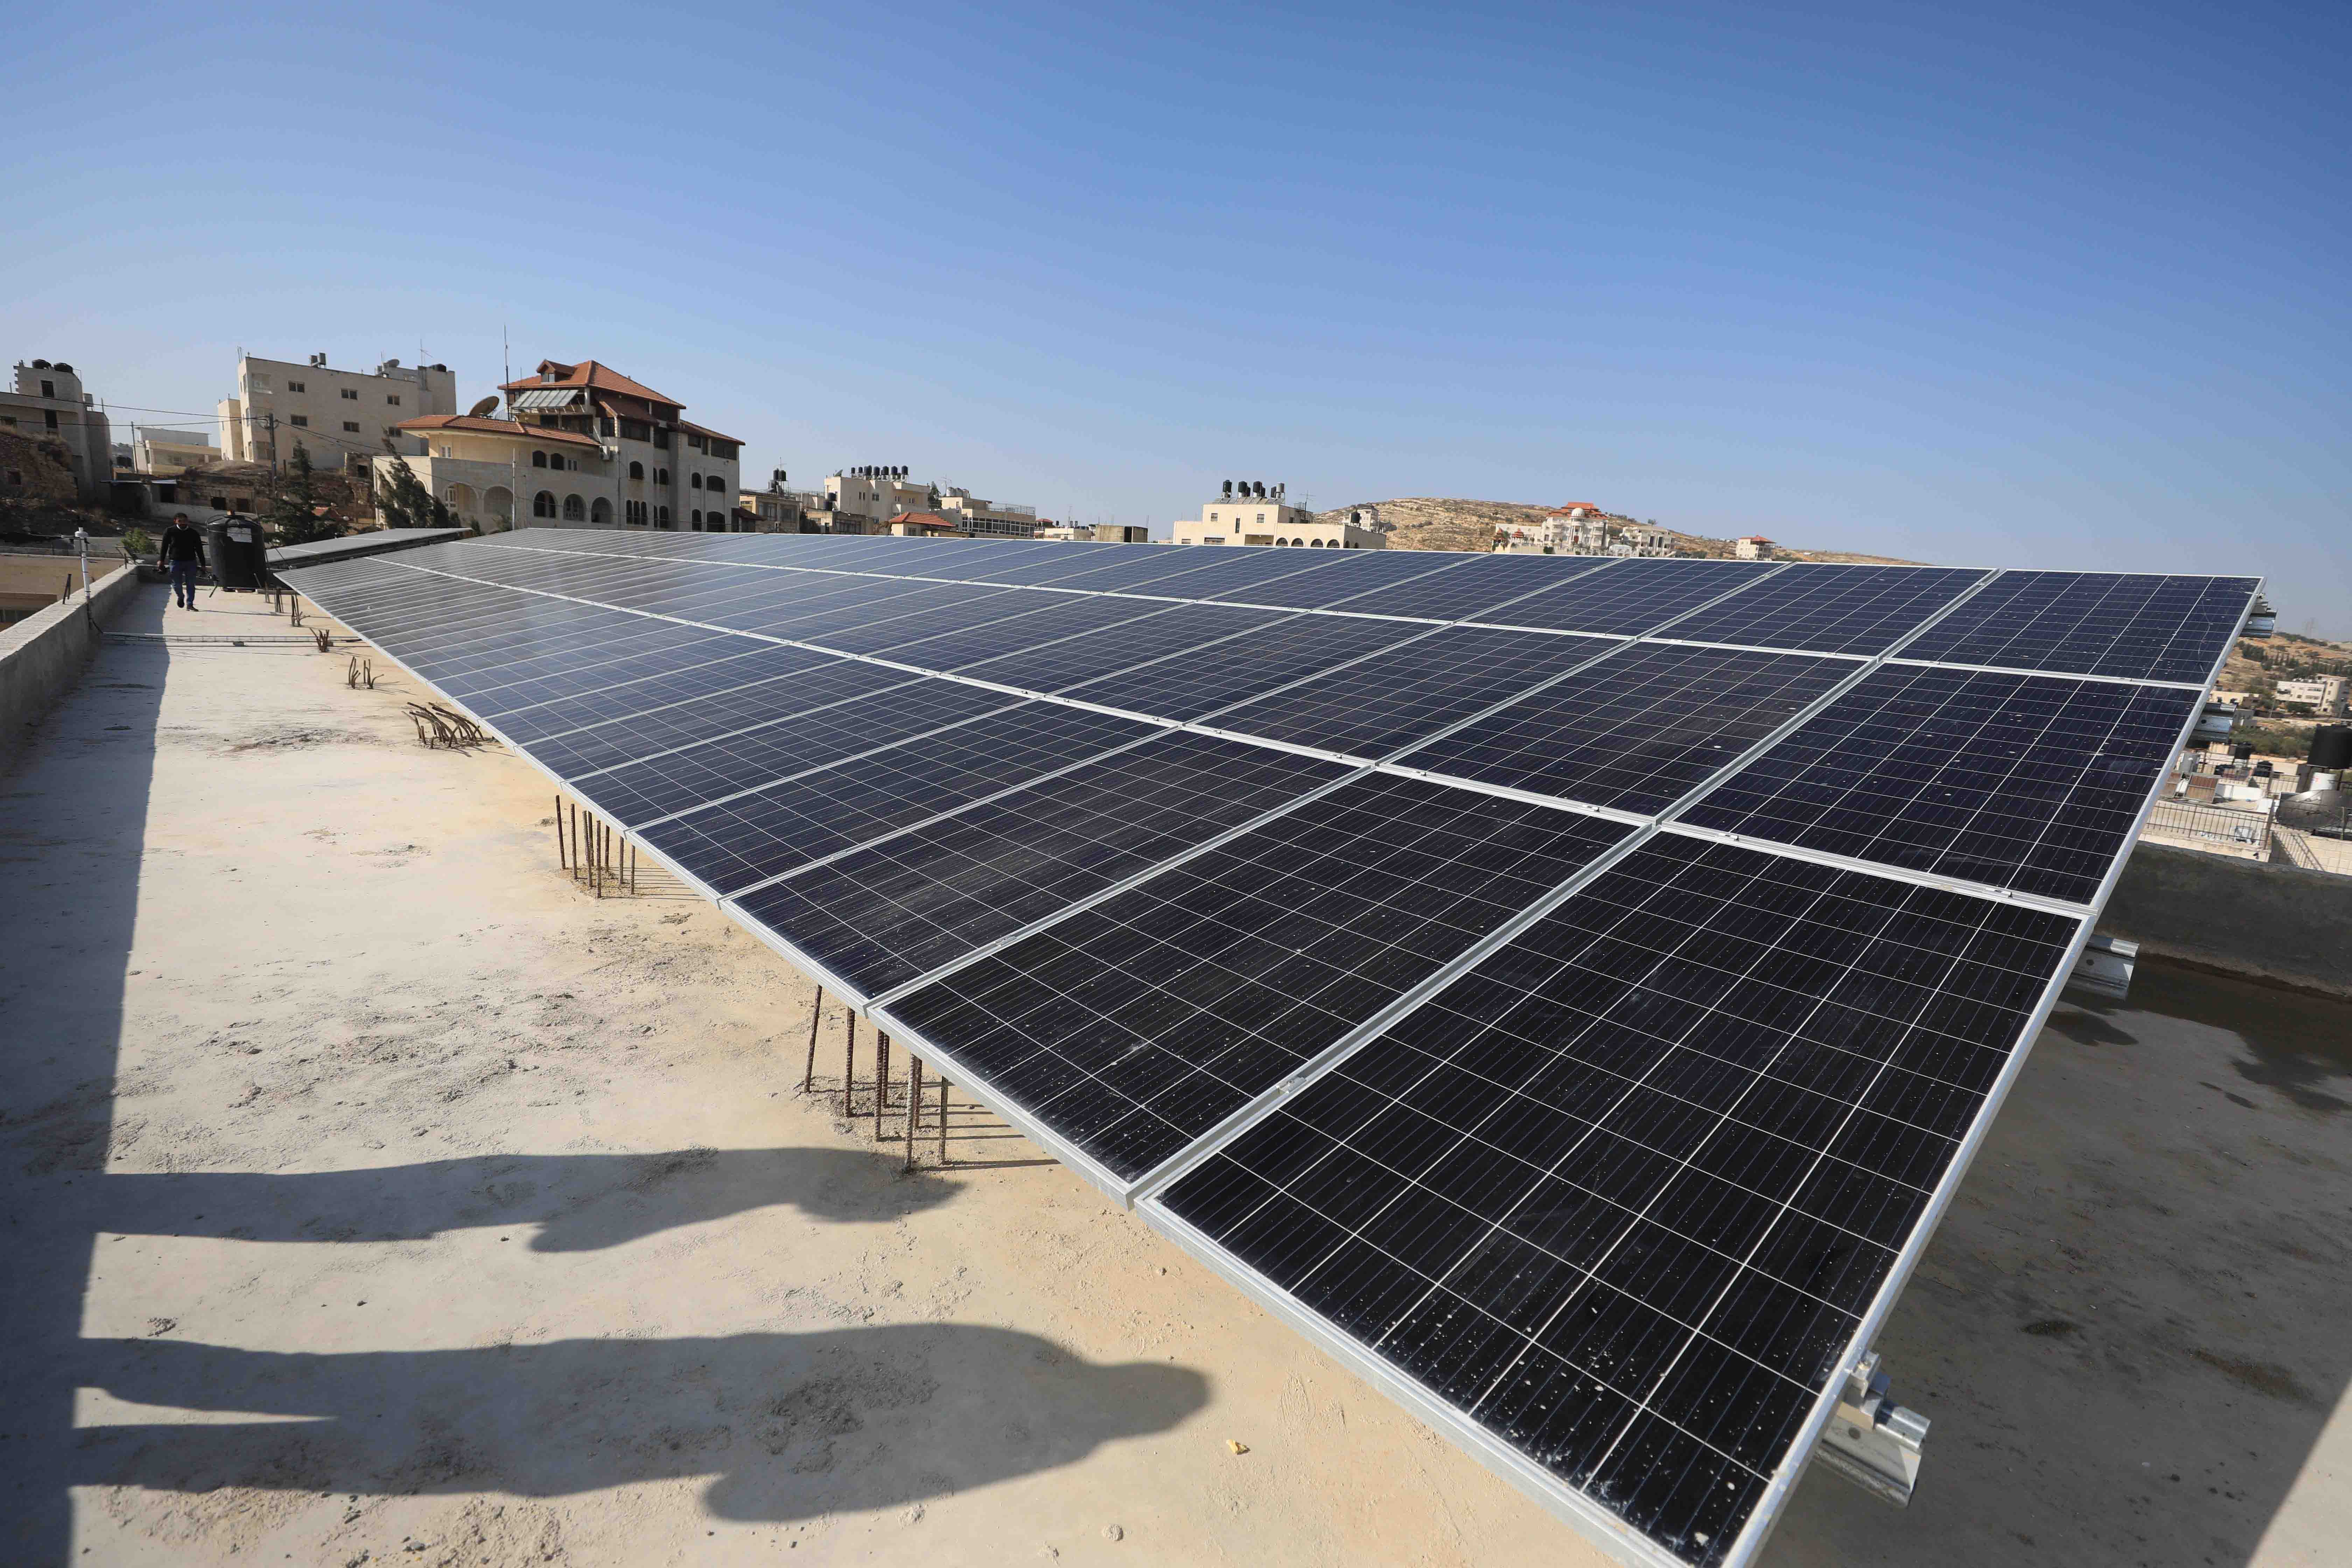 Finland’s investments in the IFC climate fund enabled more than 500 schools in the Palestinian territories in the West Bank and Gaza to put solar panels on their roofs. 